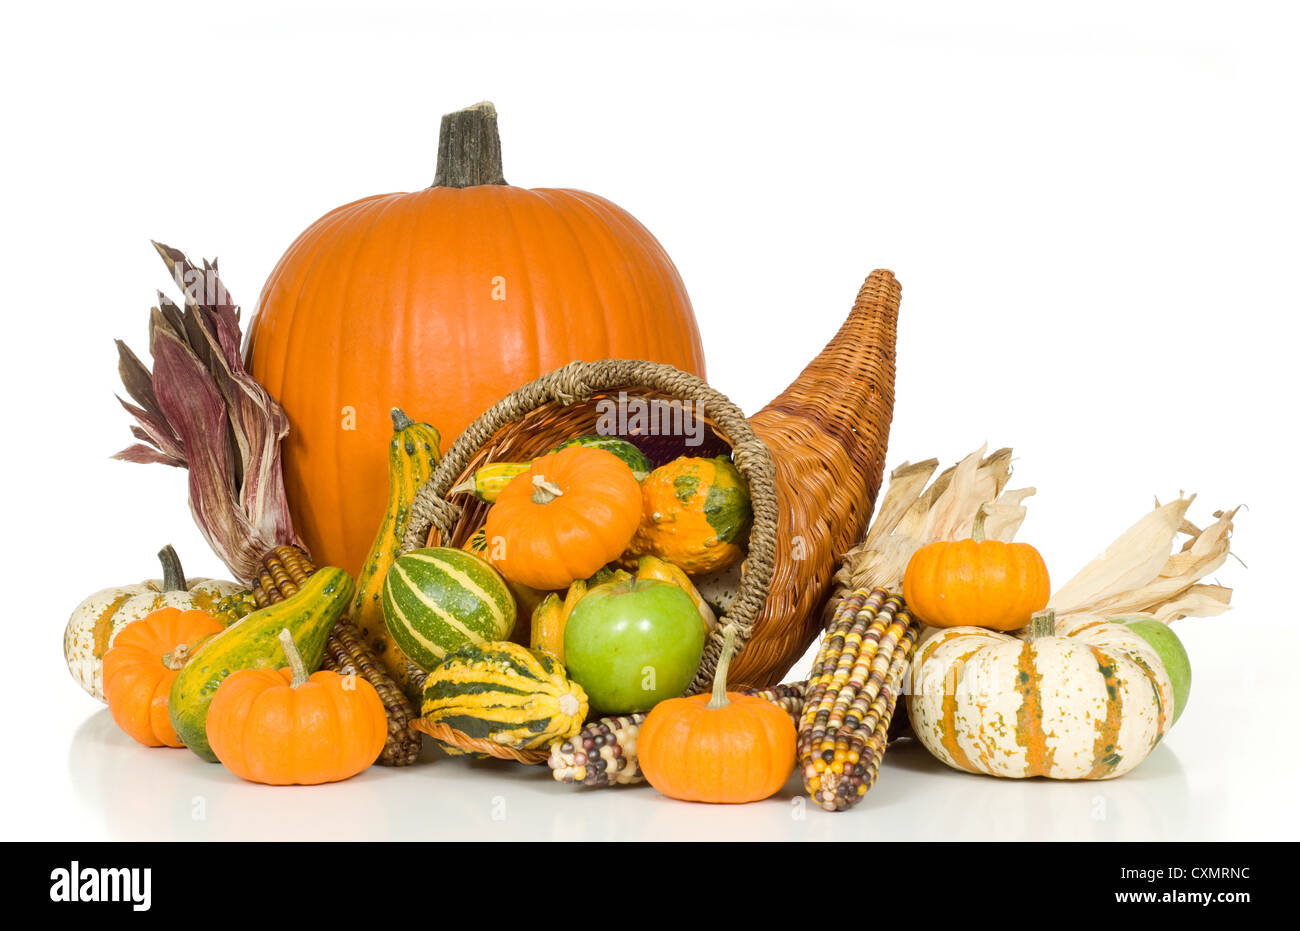 Cornucopia with fall harvest items including pumpkins, gourds, apples ...